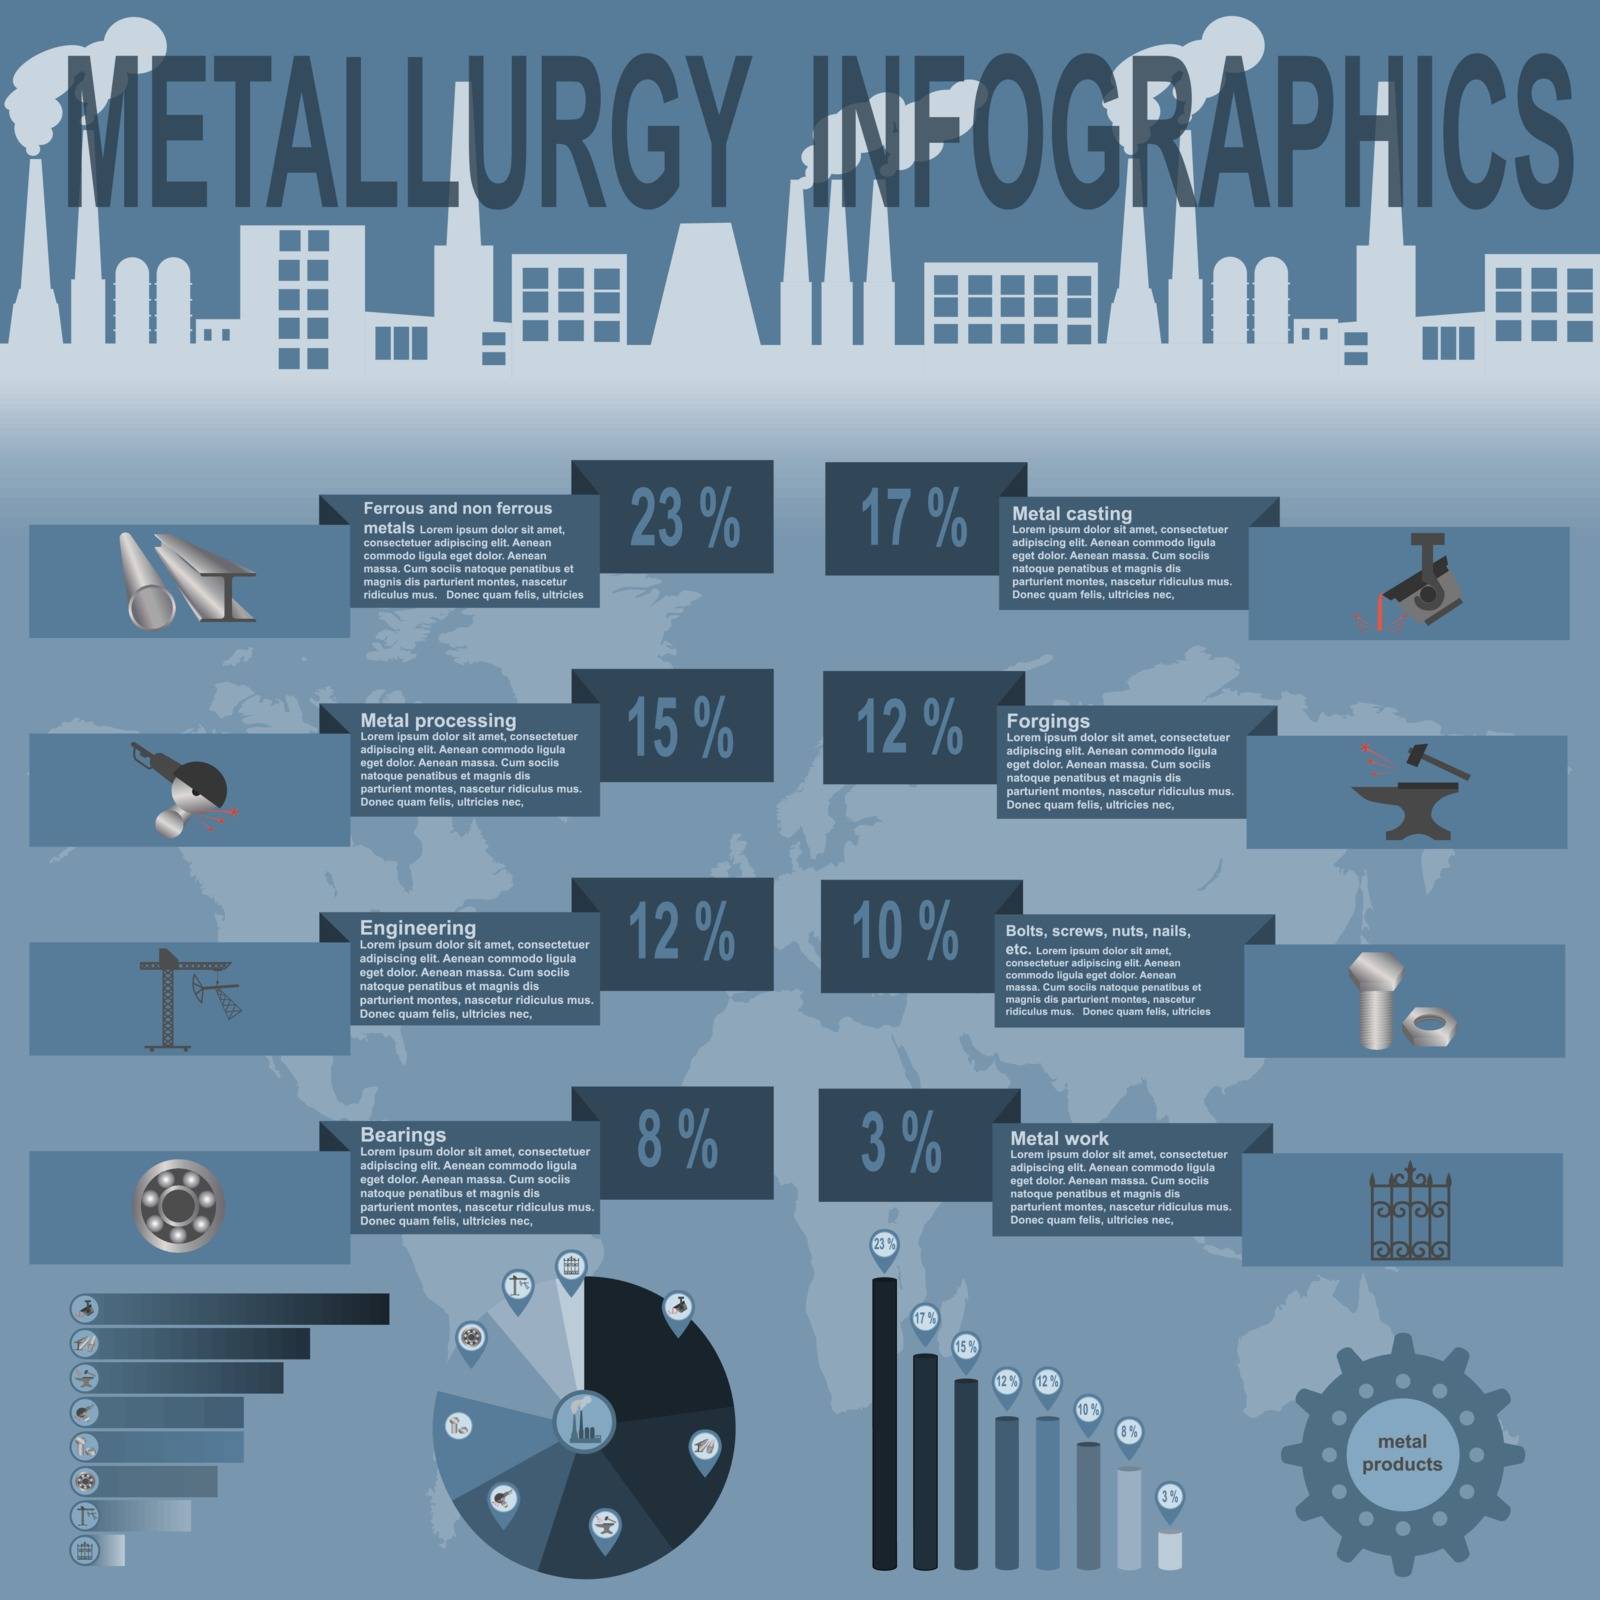 Metallurgical industry info graphics by A7880S